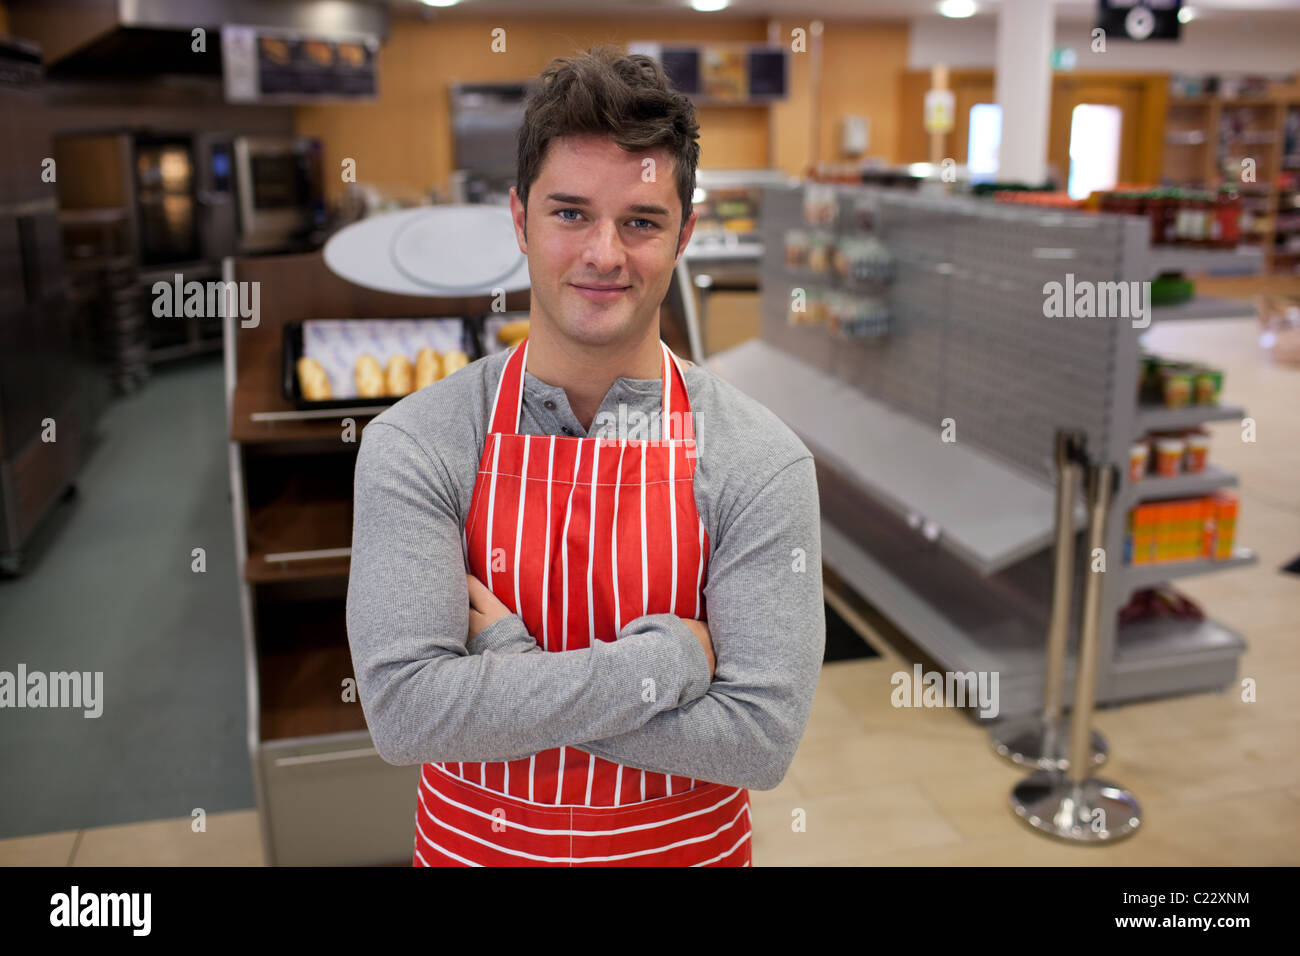 Assertive cook smiling at the camera Stock Photo